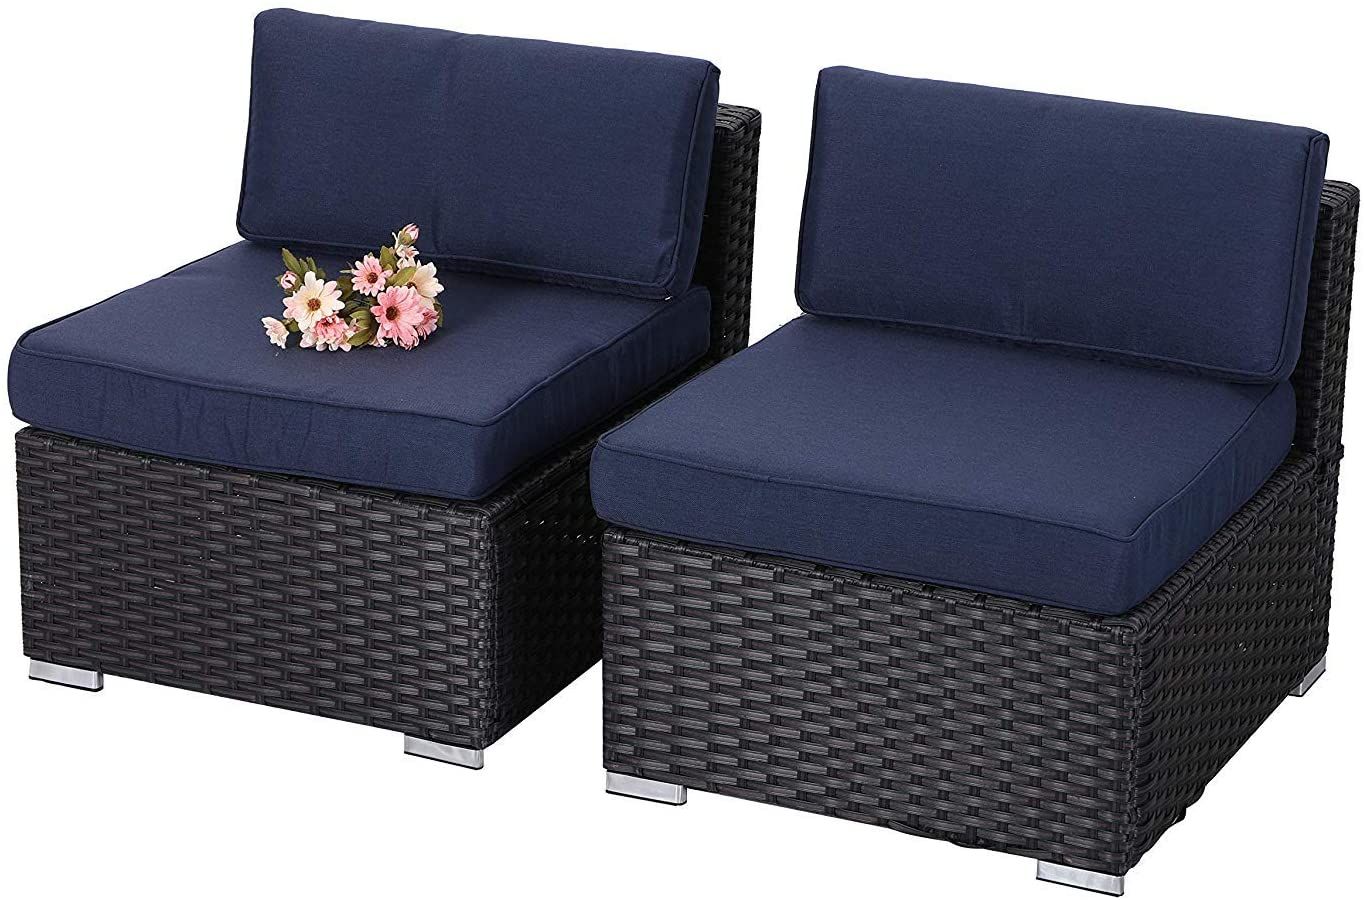 Mf Studio Outdoor Sectional Furniture 2 Piece Patio Sofa Set Low Back Inside Navy Outdoor Seating Sectional Patio Sets (View 13 of 15)